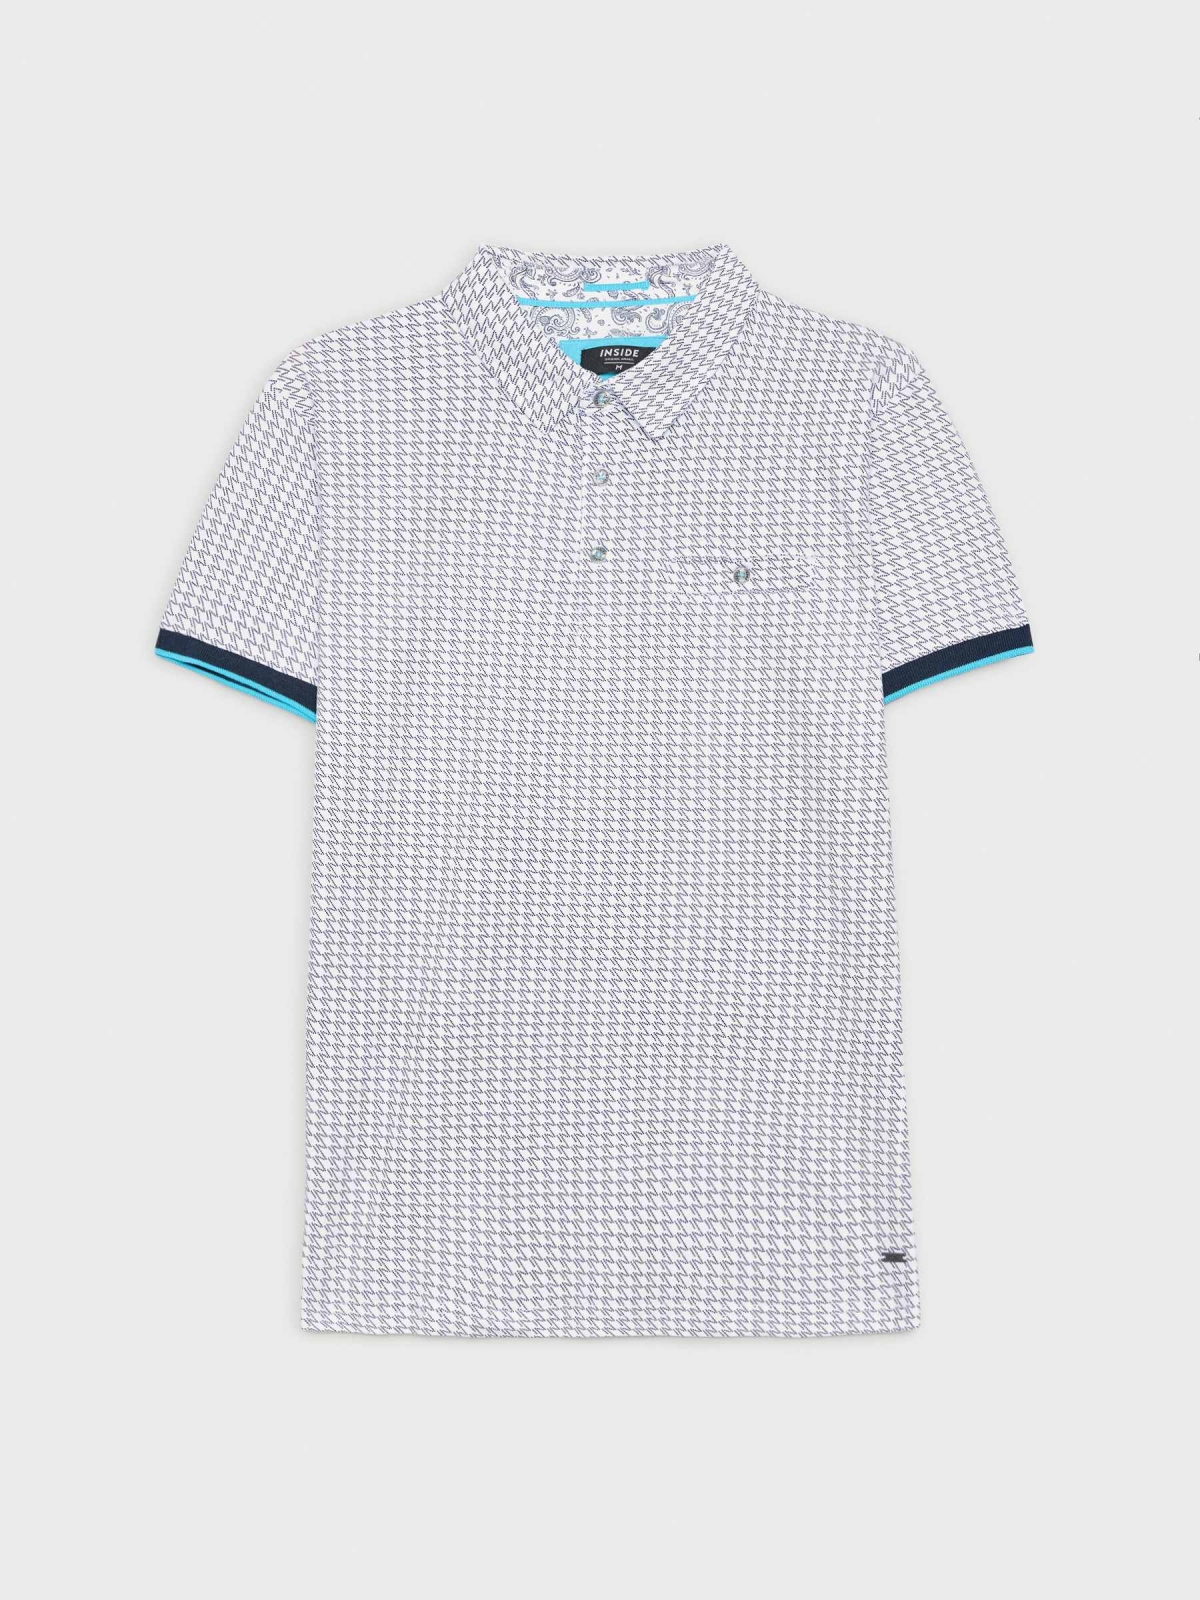  Printed polo shirt with button pocket navy